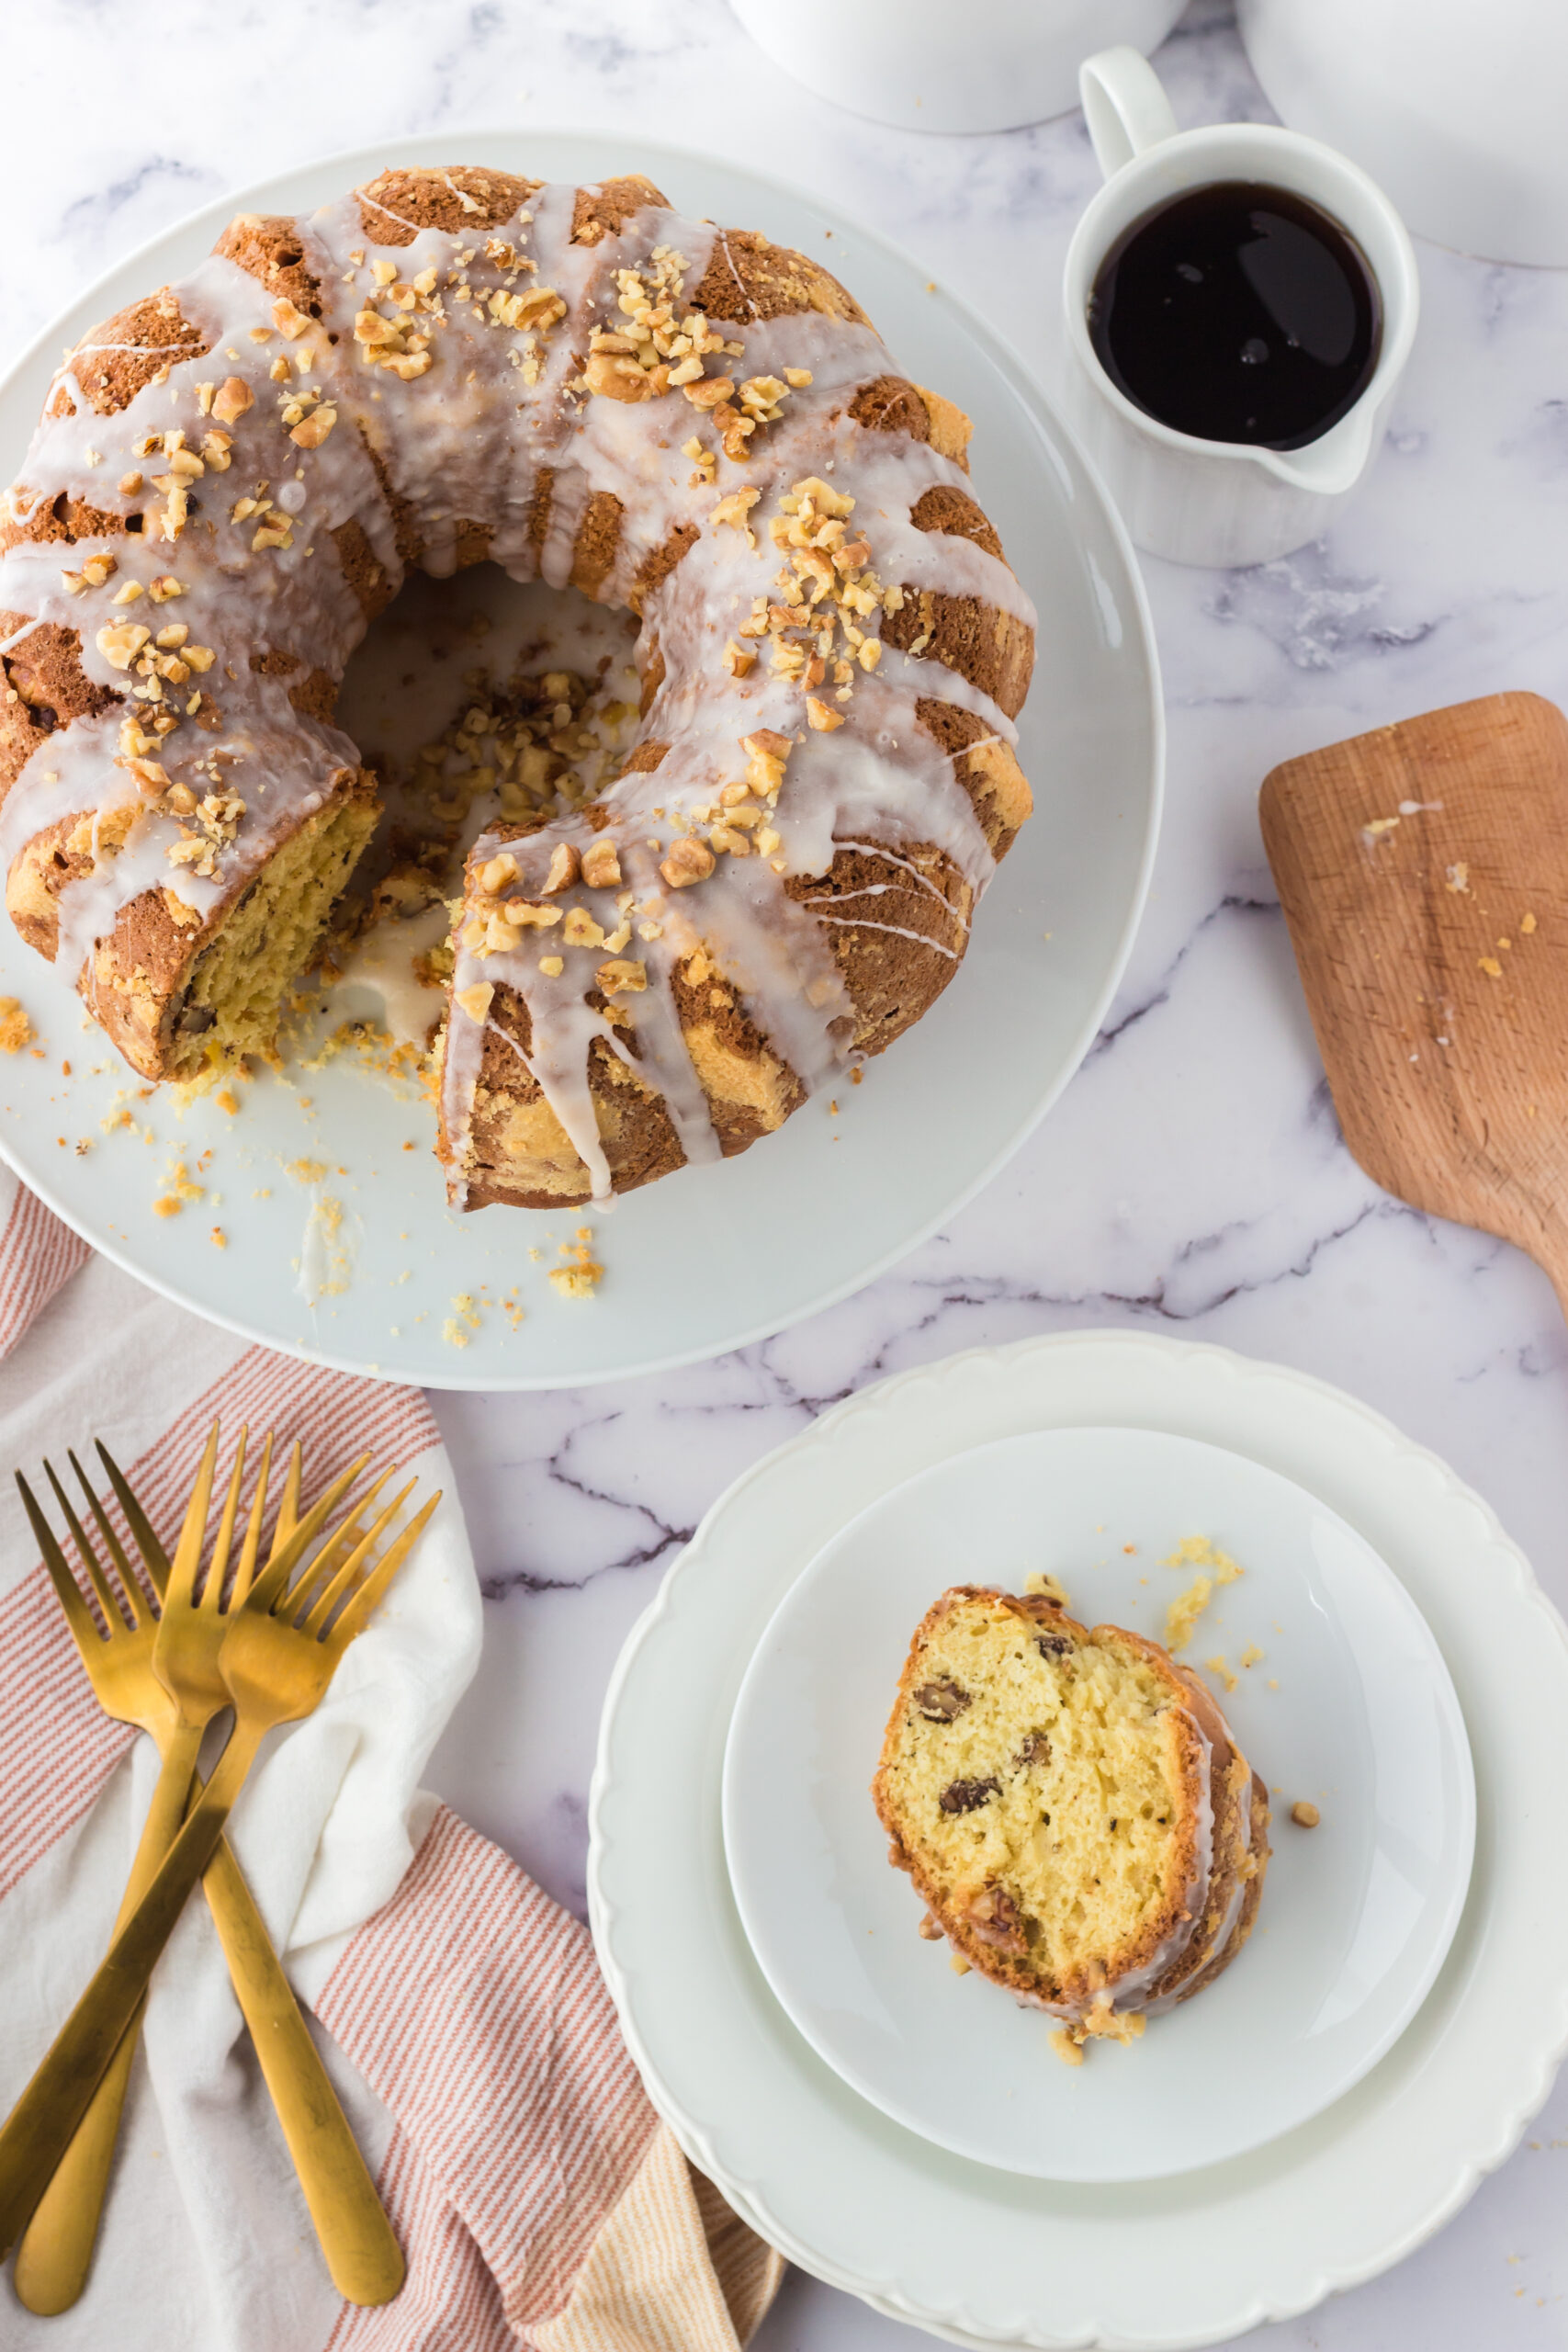 birds eye image of a maple walnut bundt cake on a white cake stand with a slice on a plate